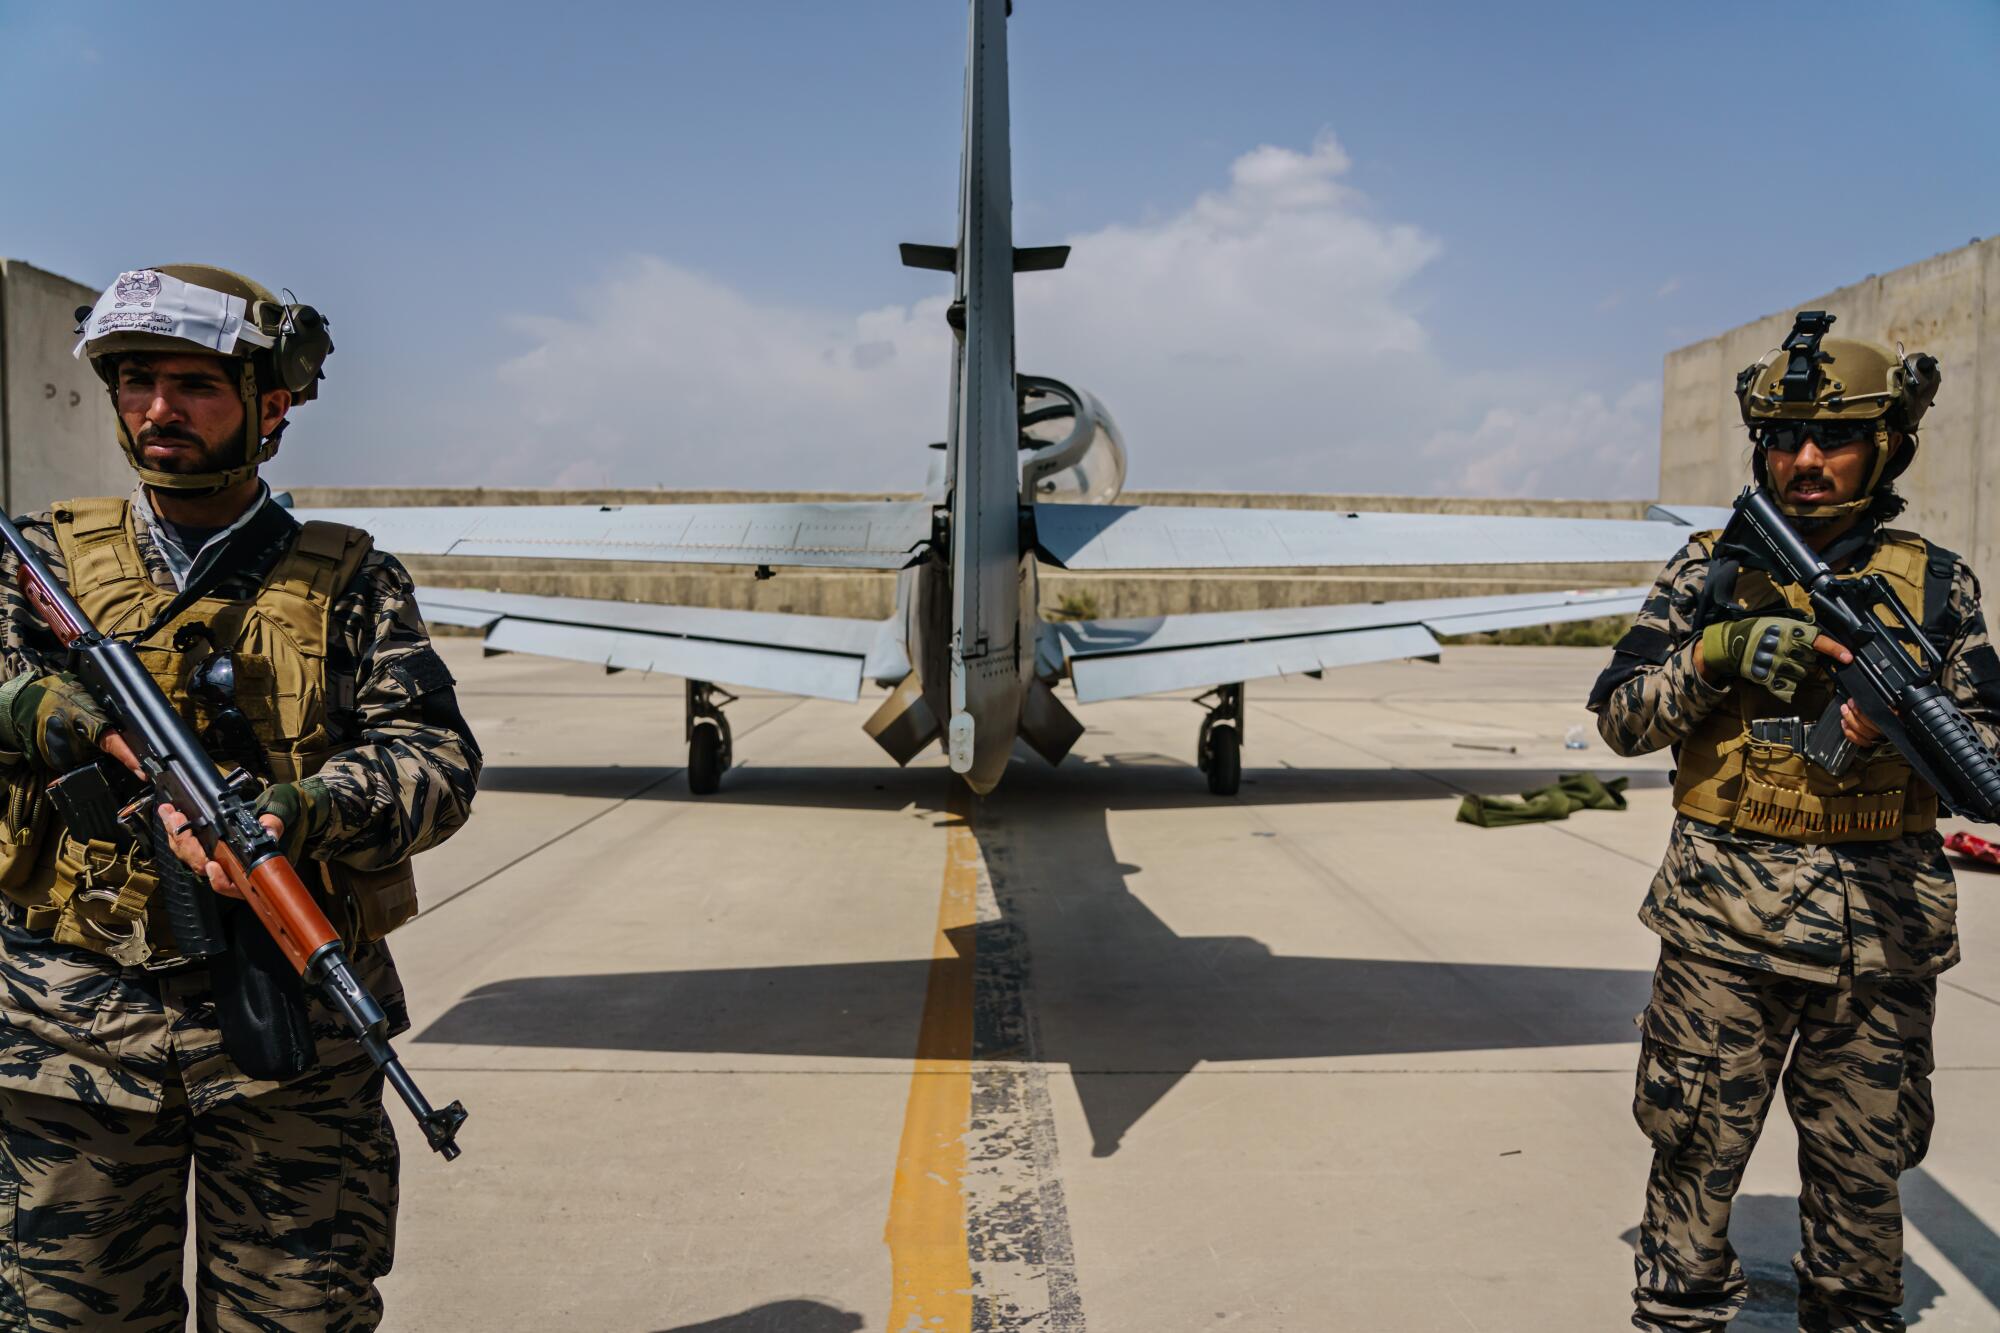 Taliban fighters with guns stand behind an airplane at Hamid Karzai International Airport